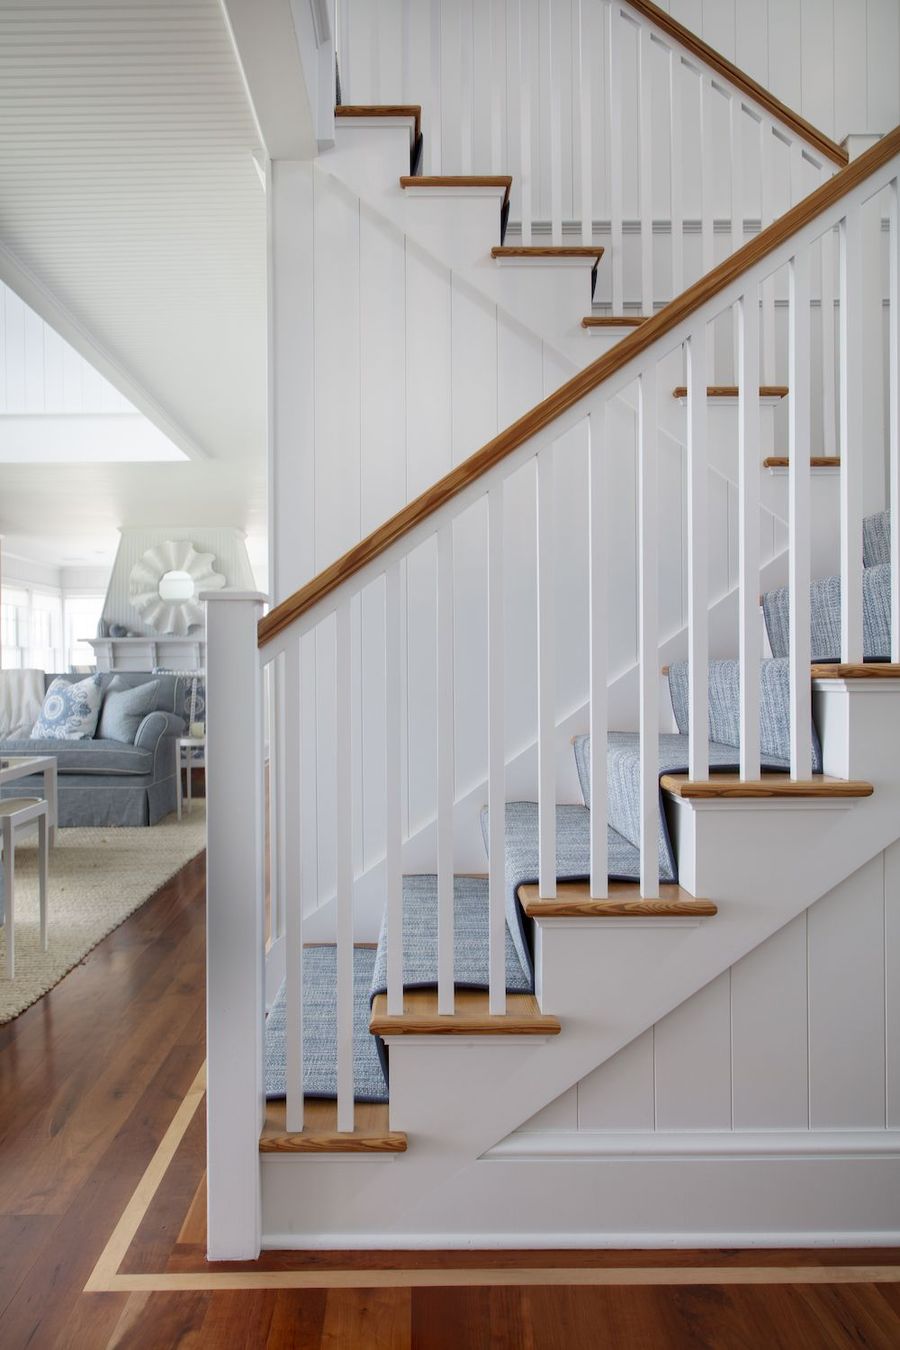 Blue runner and vertical shiplap walls Coastal Staircase decor via Elements of Style